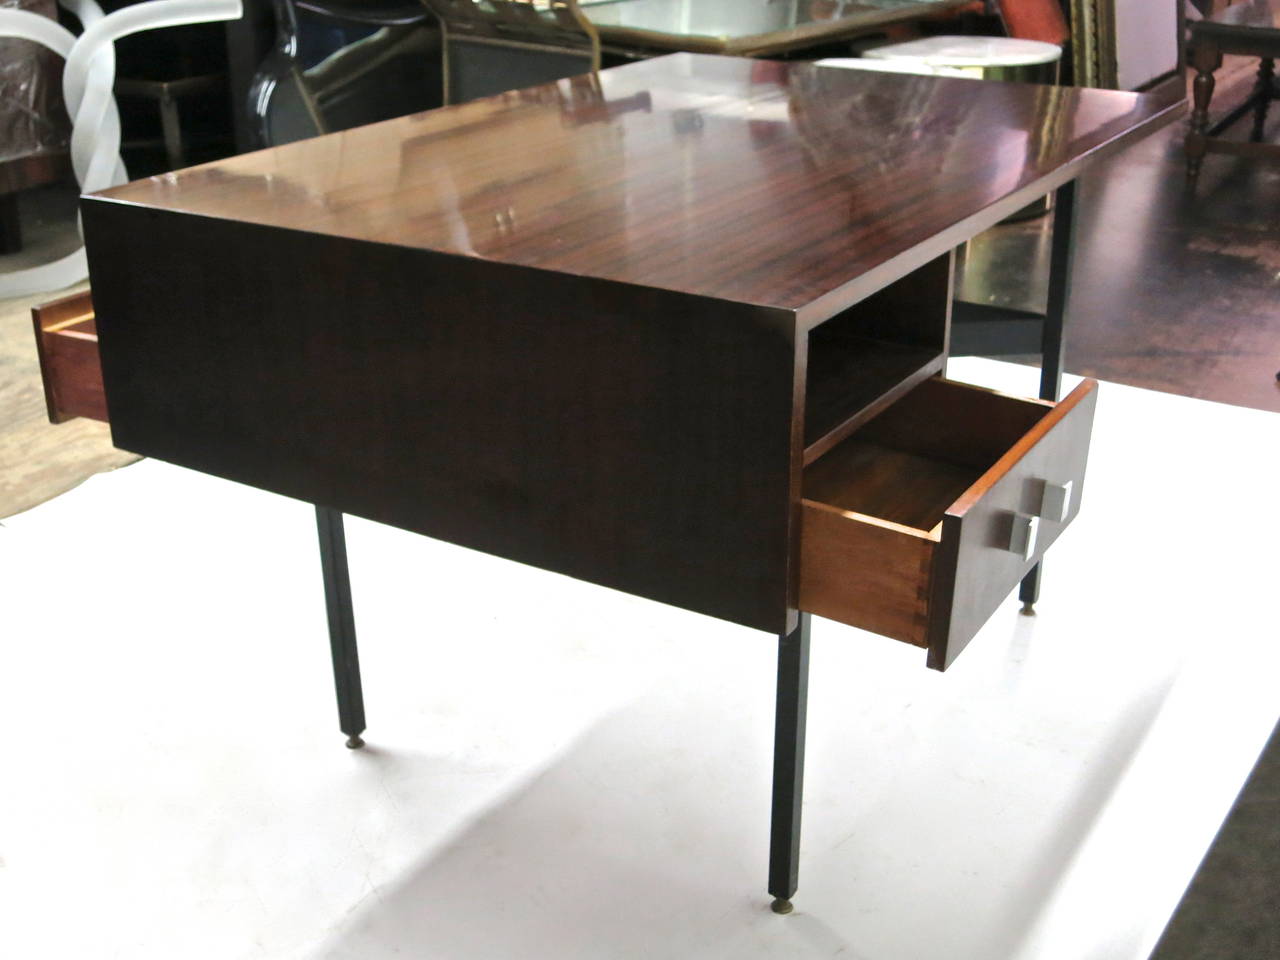 Asymmetrical partners desk in mahogany wood with one shelf and one drawer on each side, all supported on a metal base that has a stretcher with ends bent to two inward facing triangular forms, and four solid brass and adjustable feet. Each drawer